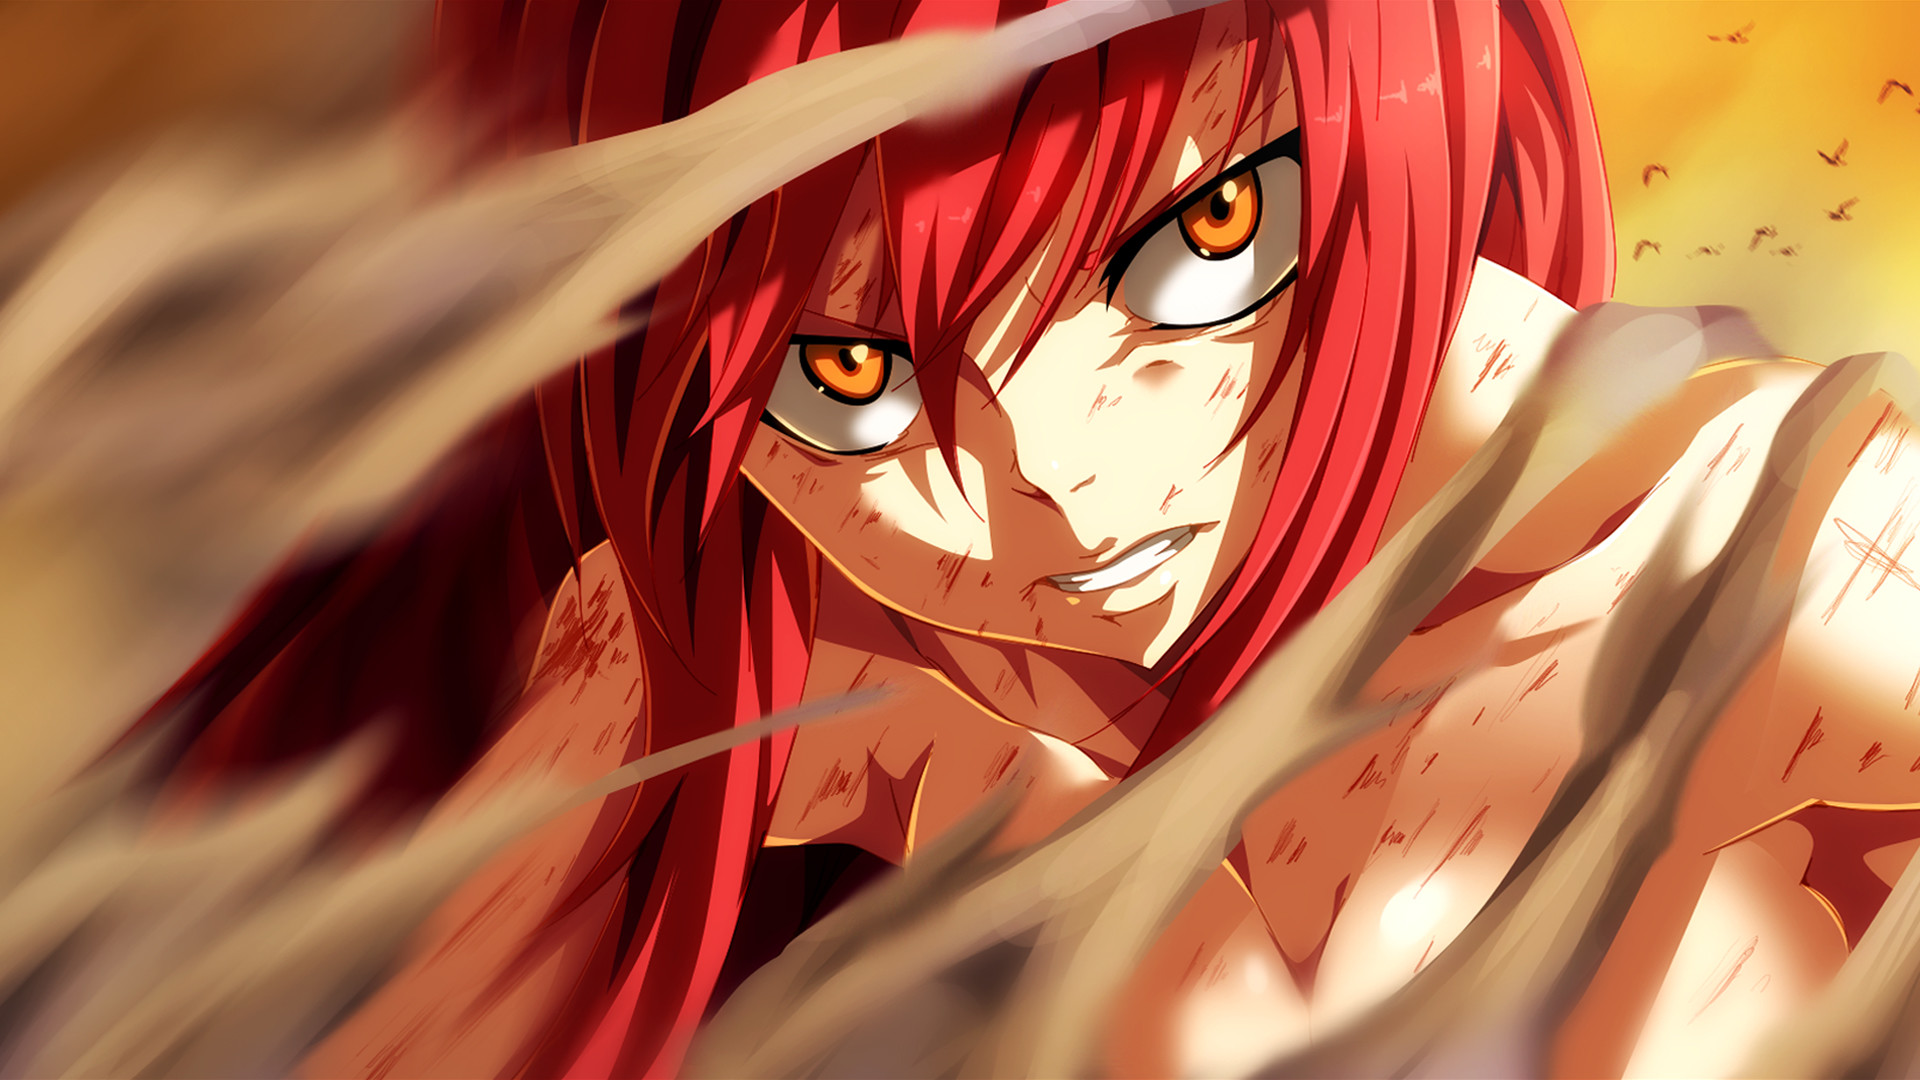 1920x1080 Fairy Tail 403 - Erza Scarlet by StingCunha on DeviantArt